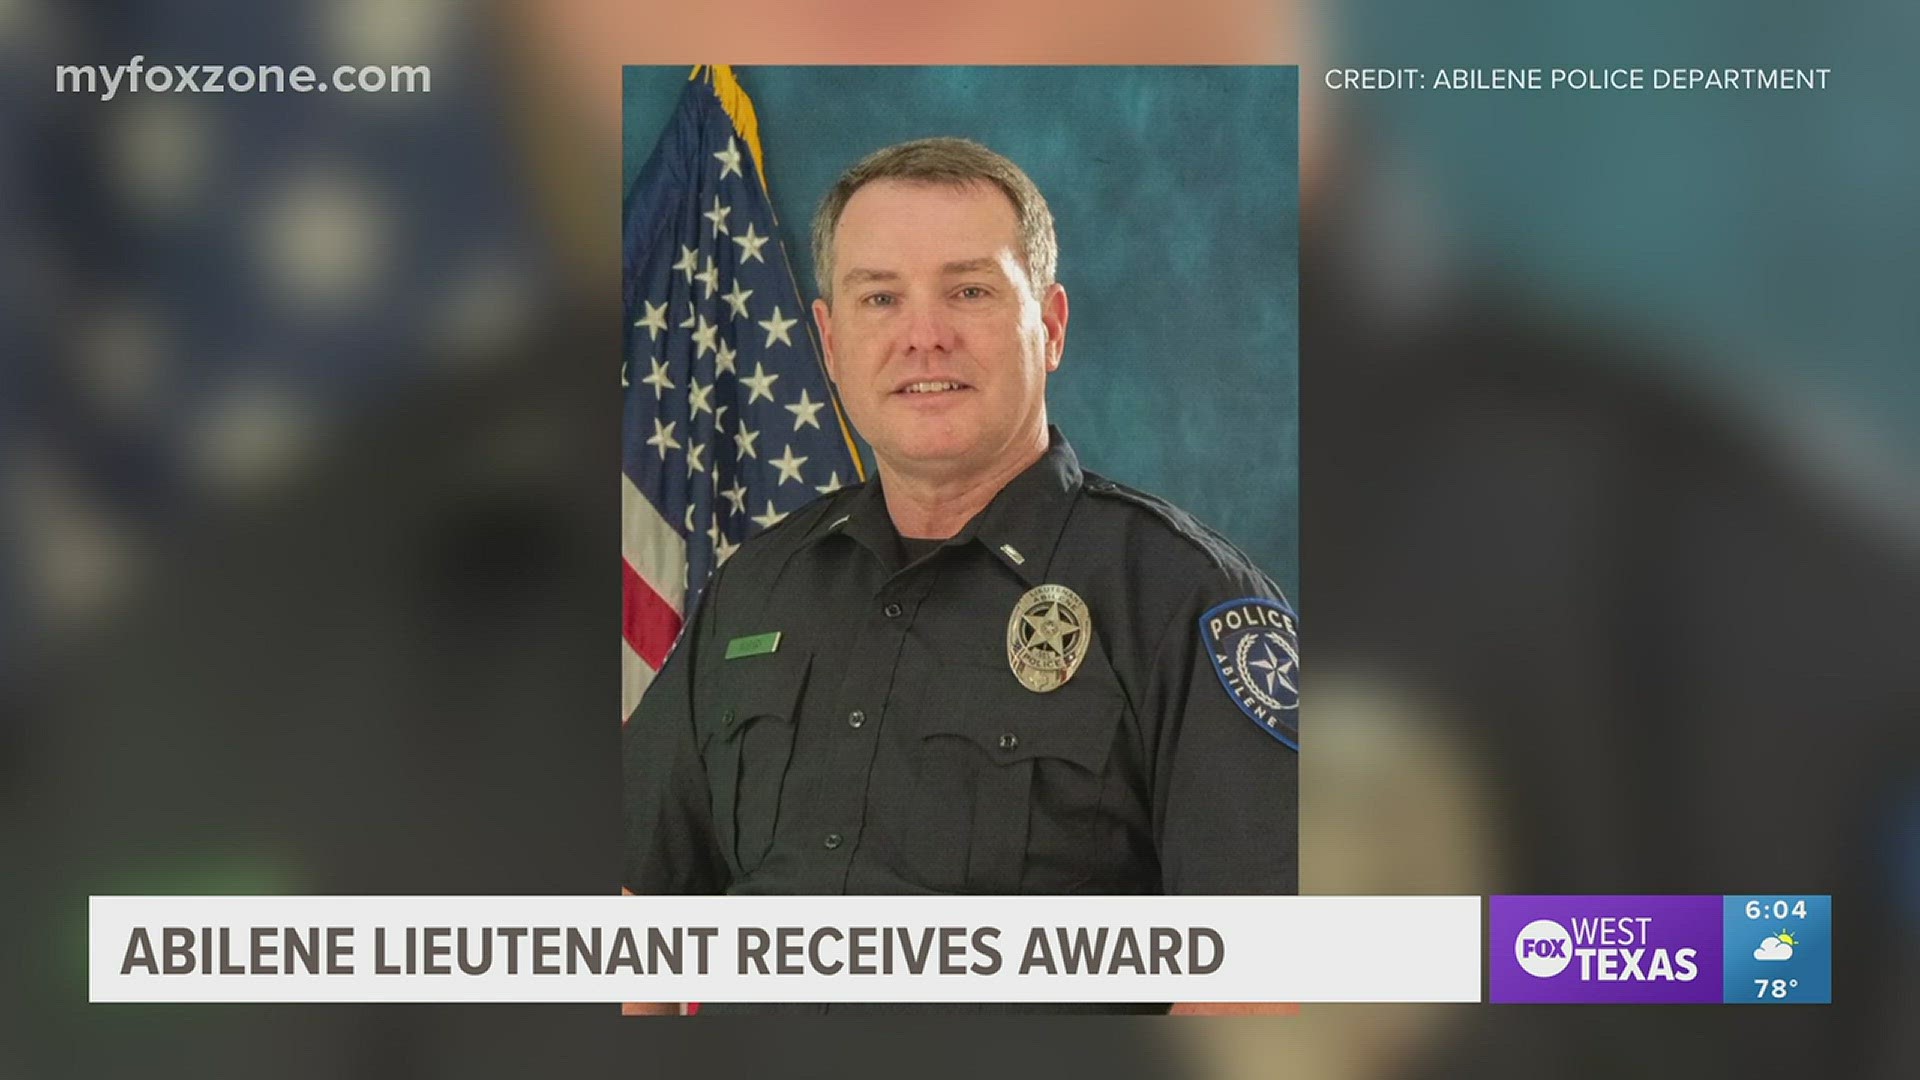 In Dallas, Friday, Sept. 15th, Abilene police lieutenant Brad McGary will receive the U.S. Attorney's Award of Excellence from the Department of Justice.